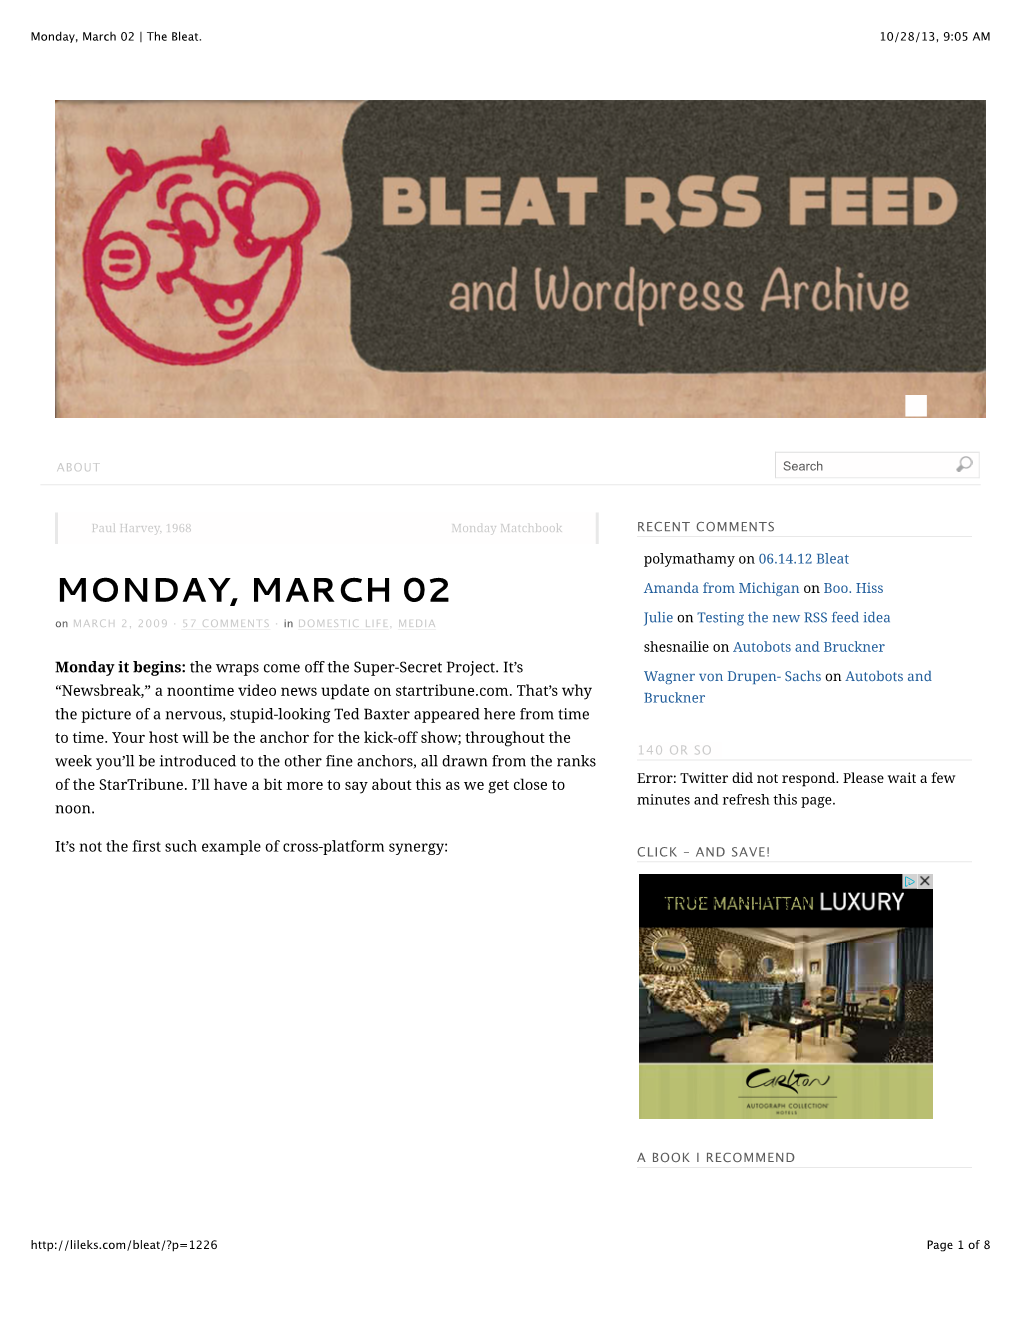 Monday, March 02 | the Bleat